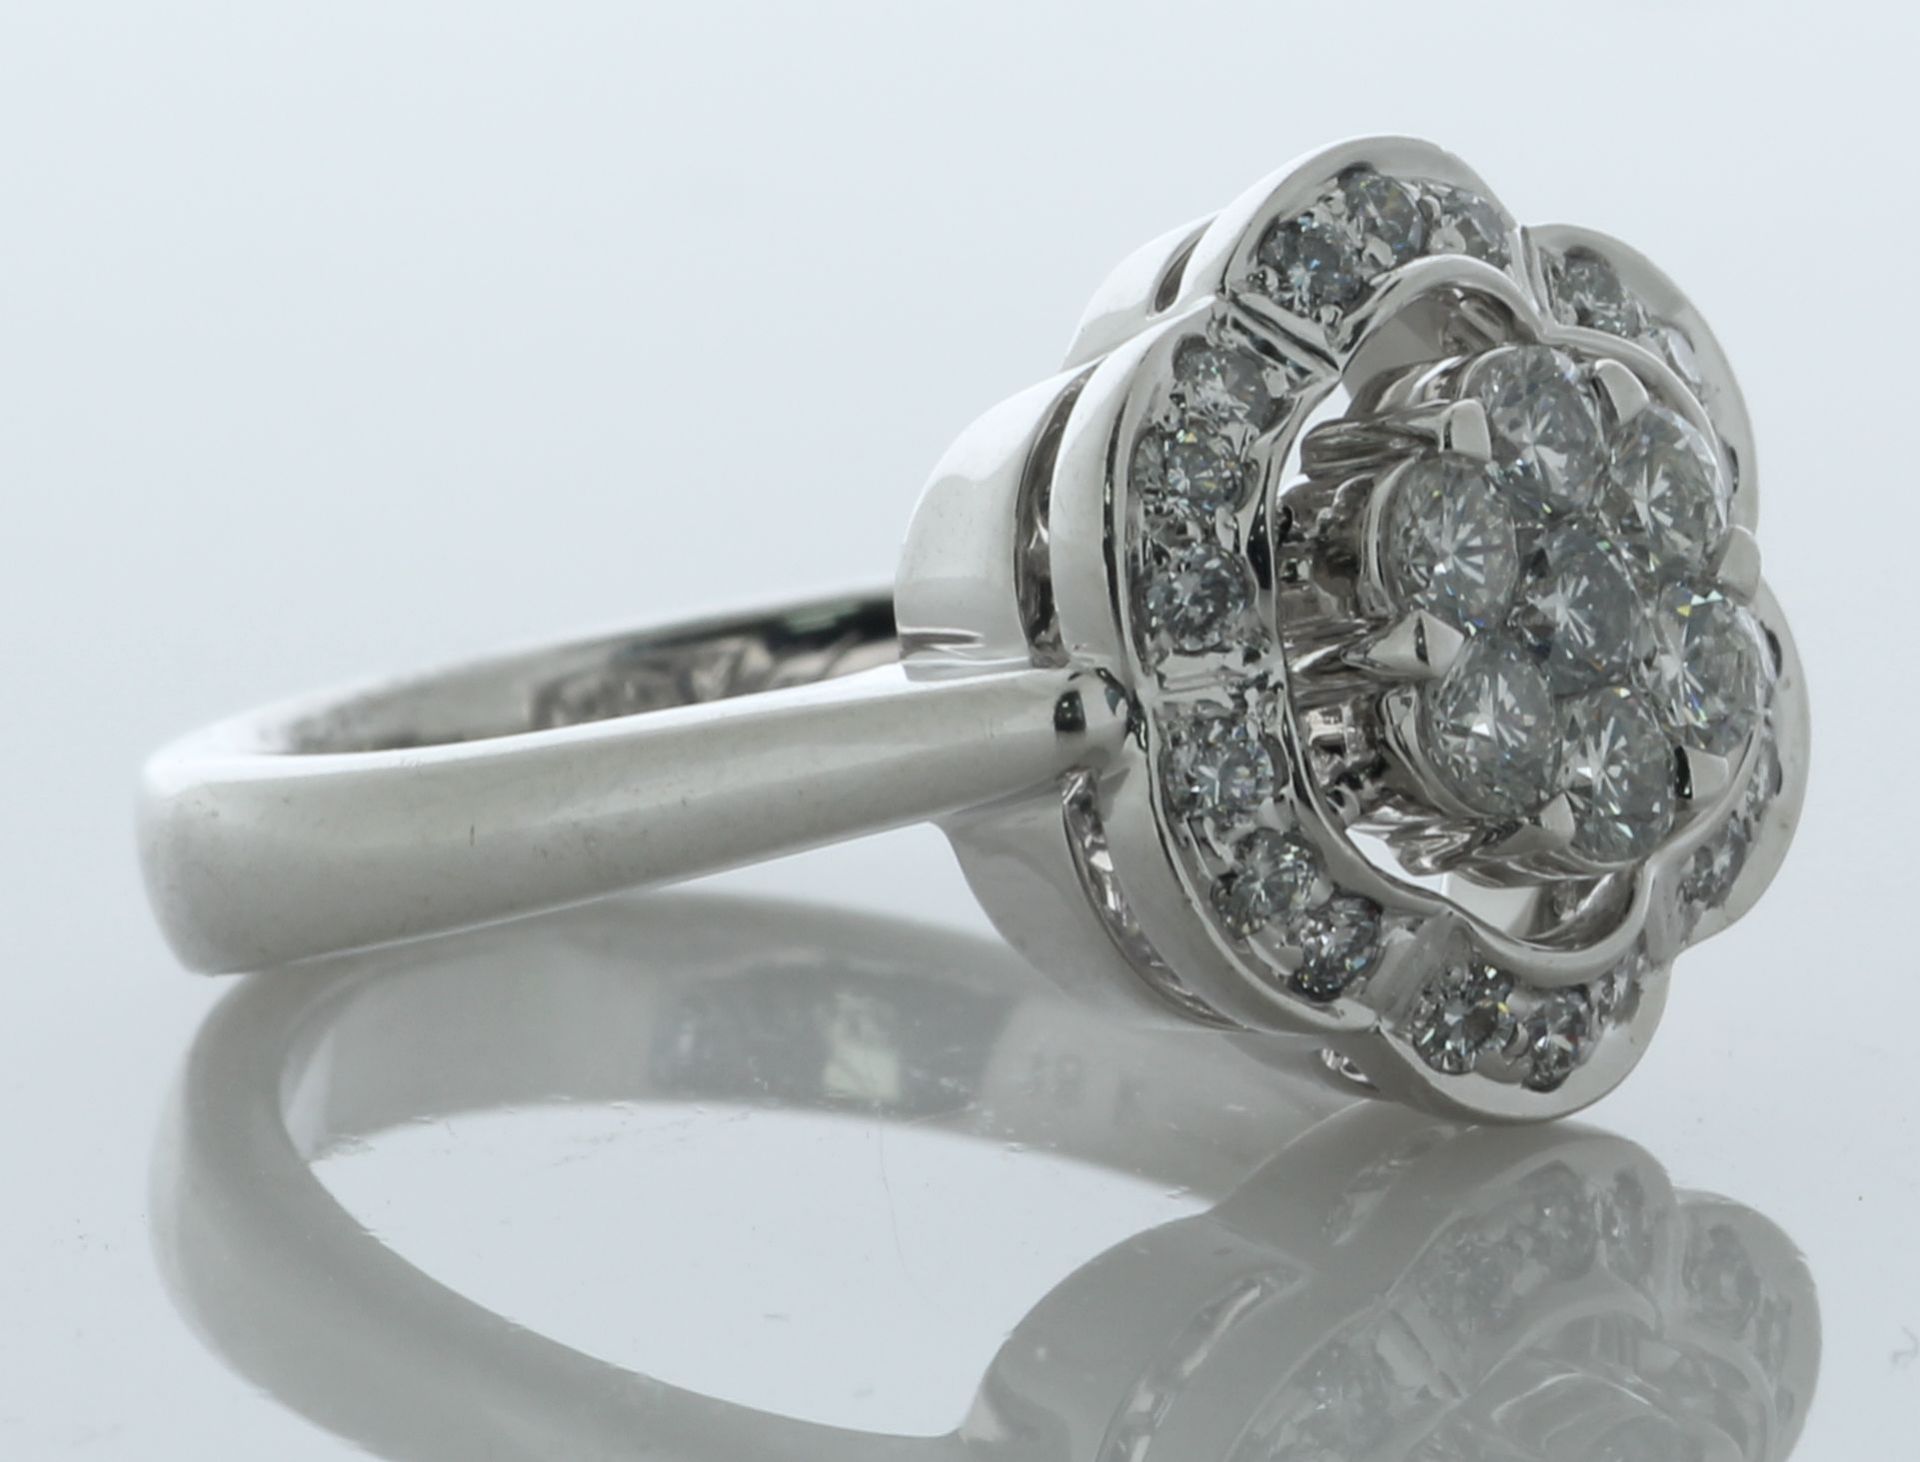 ALITO 18ct White Gold Diamond Ring 1.00 Carats - Valued By AGI £6,995.00 - A stunning designer - Image 2 of 5